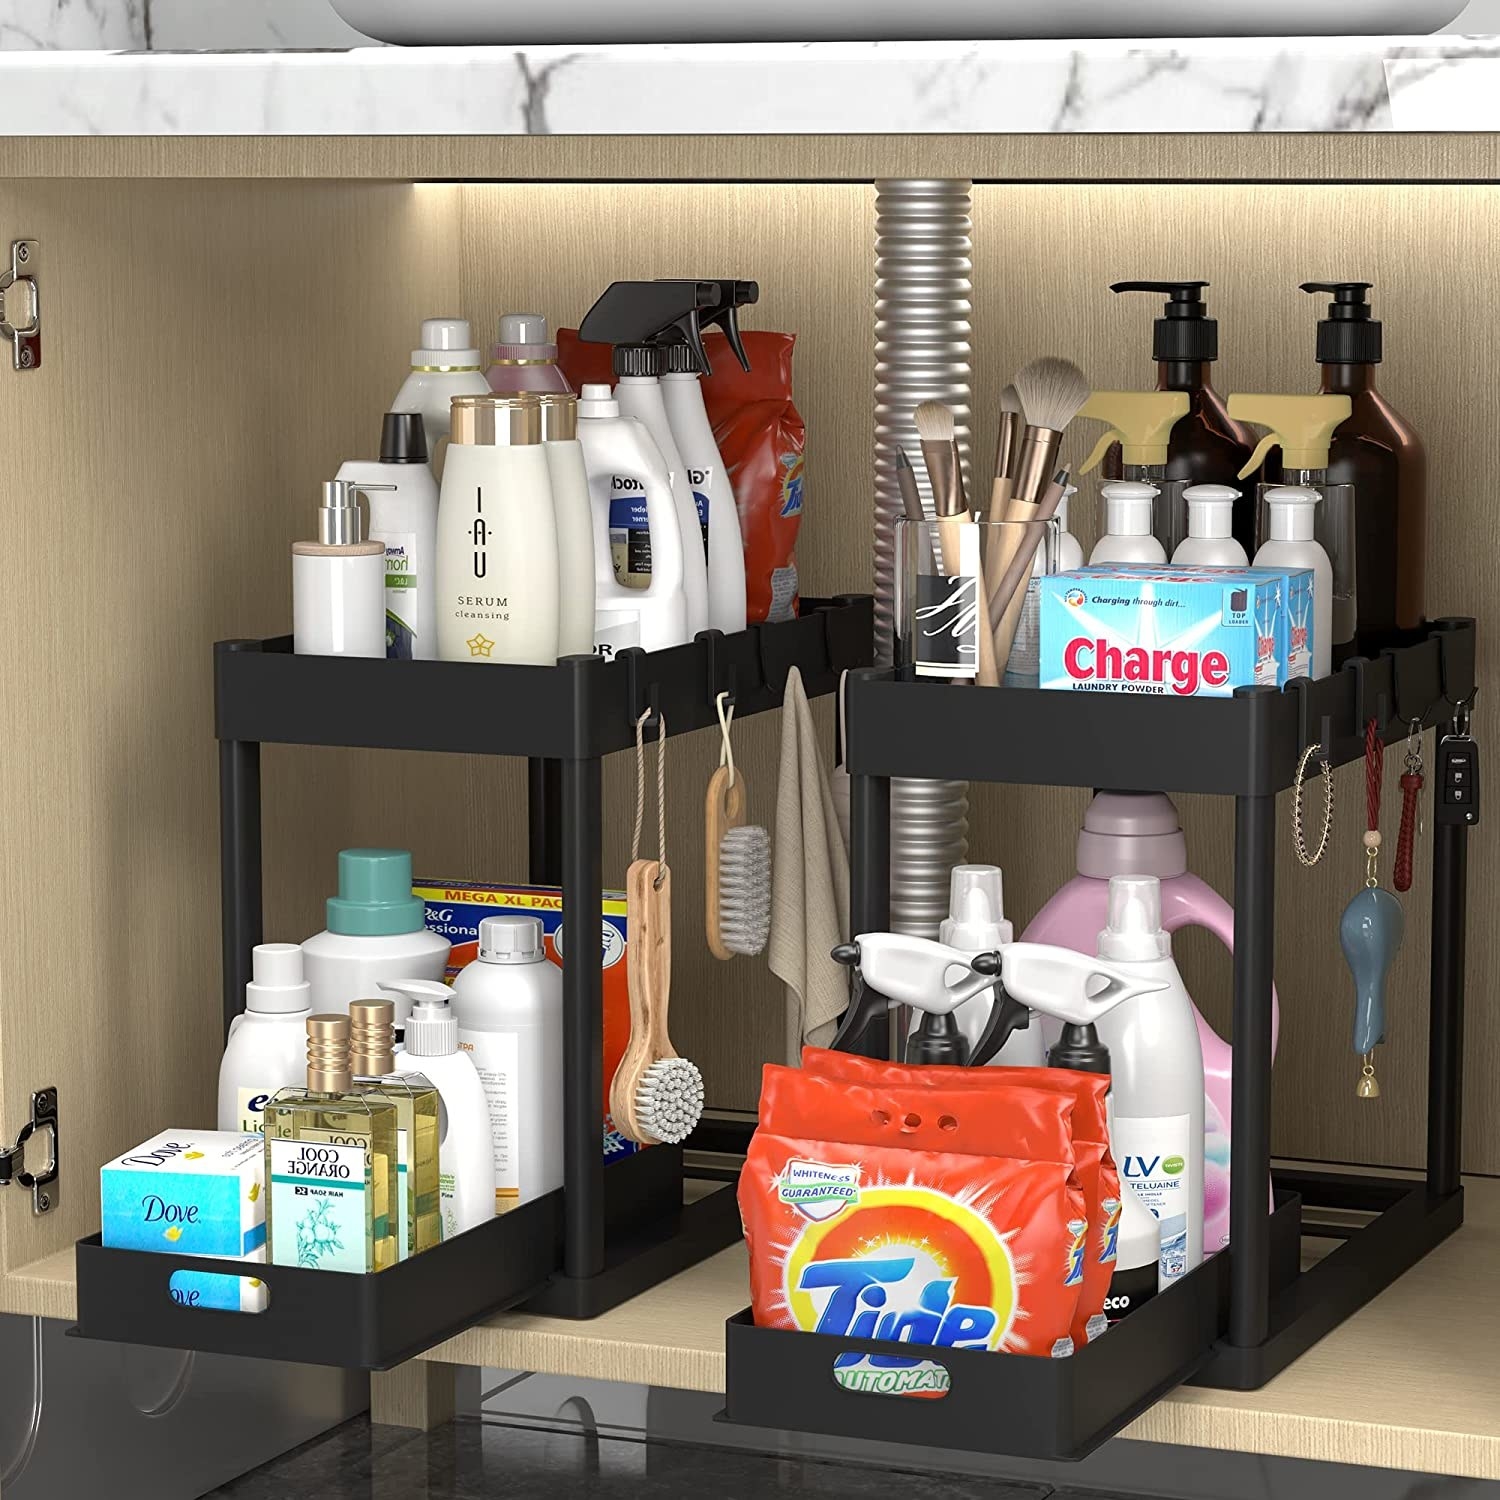 The shelves with cleaning supplies under a sink